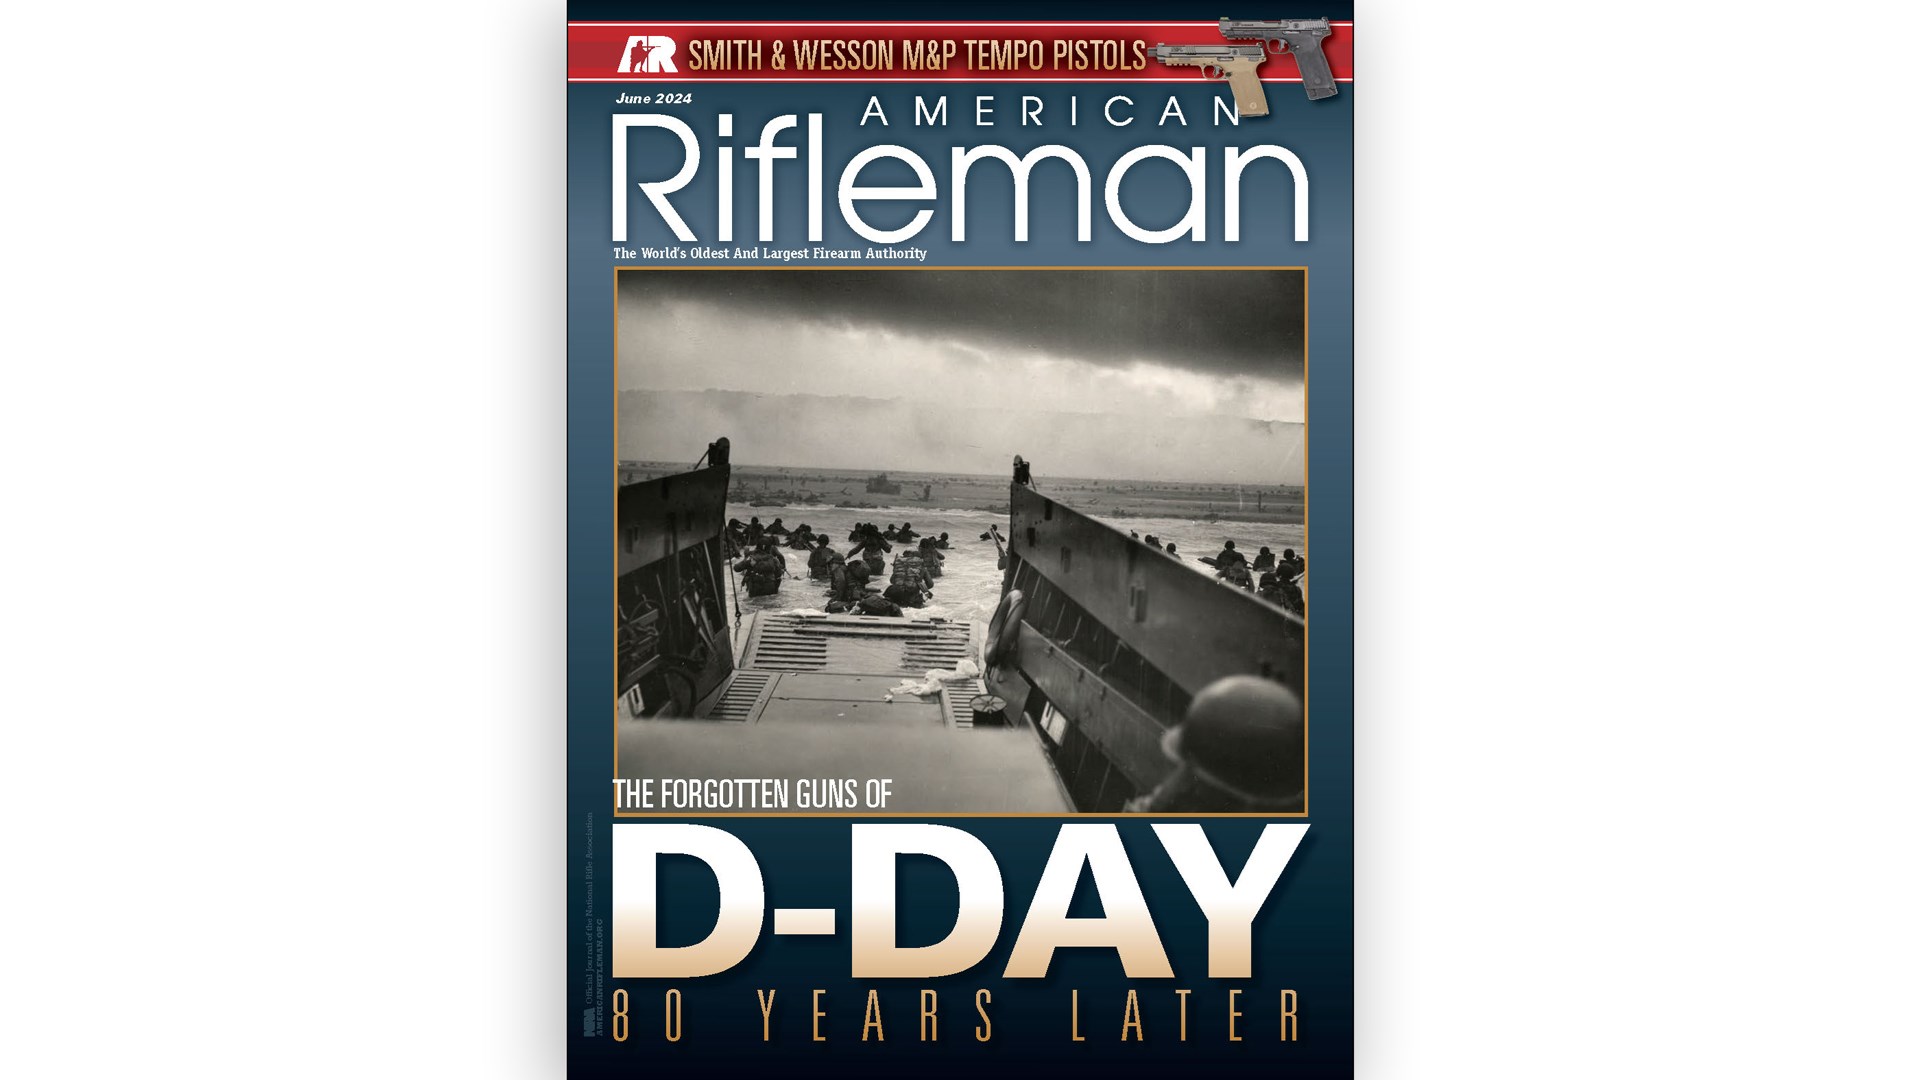 American Rifleman magazine cover D-Day 80 years later normandy boat photograph